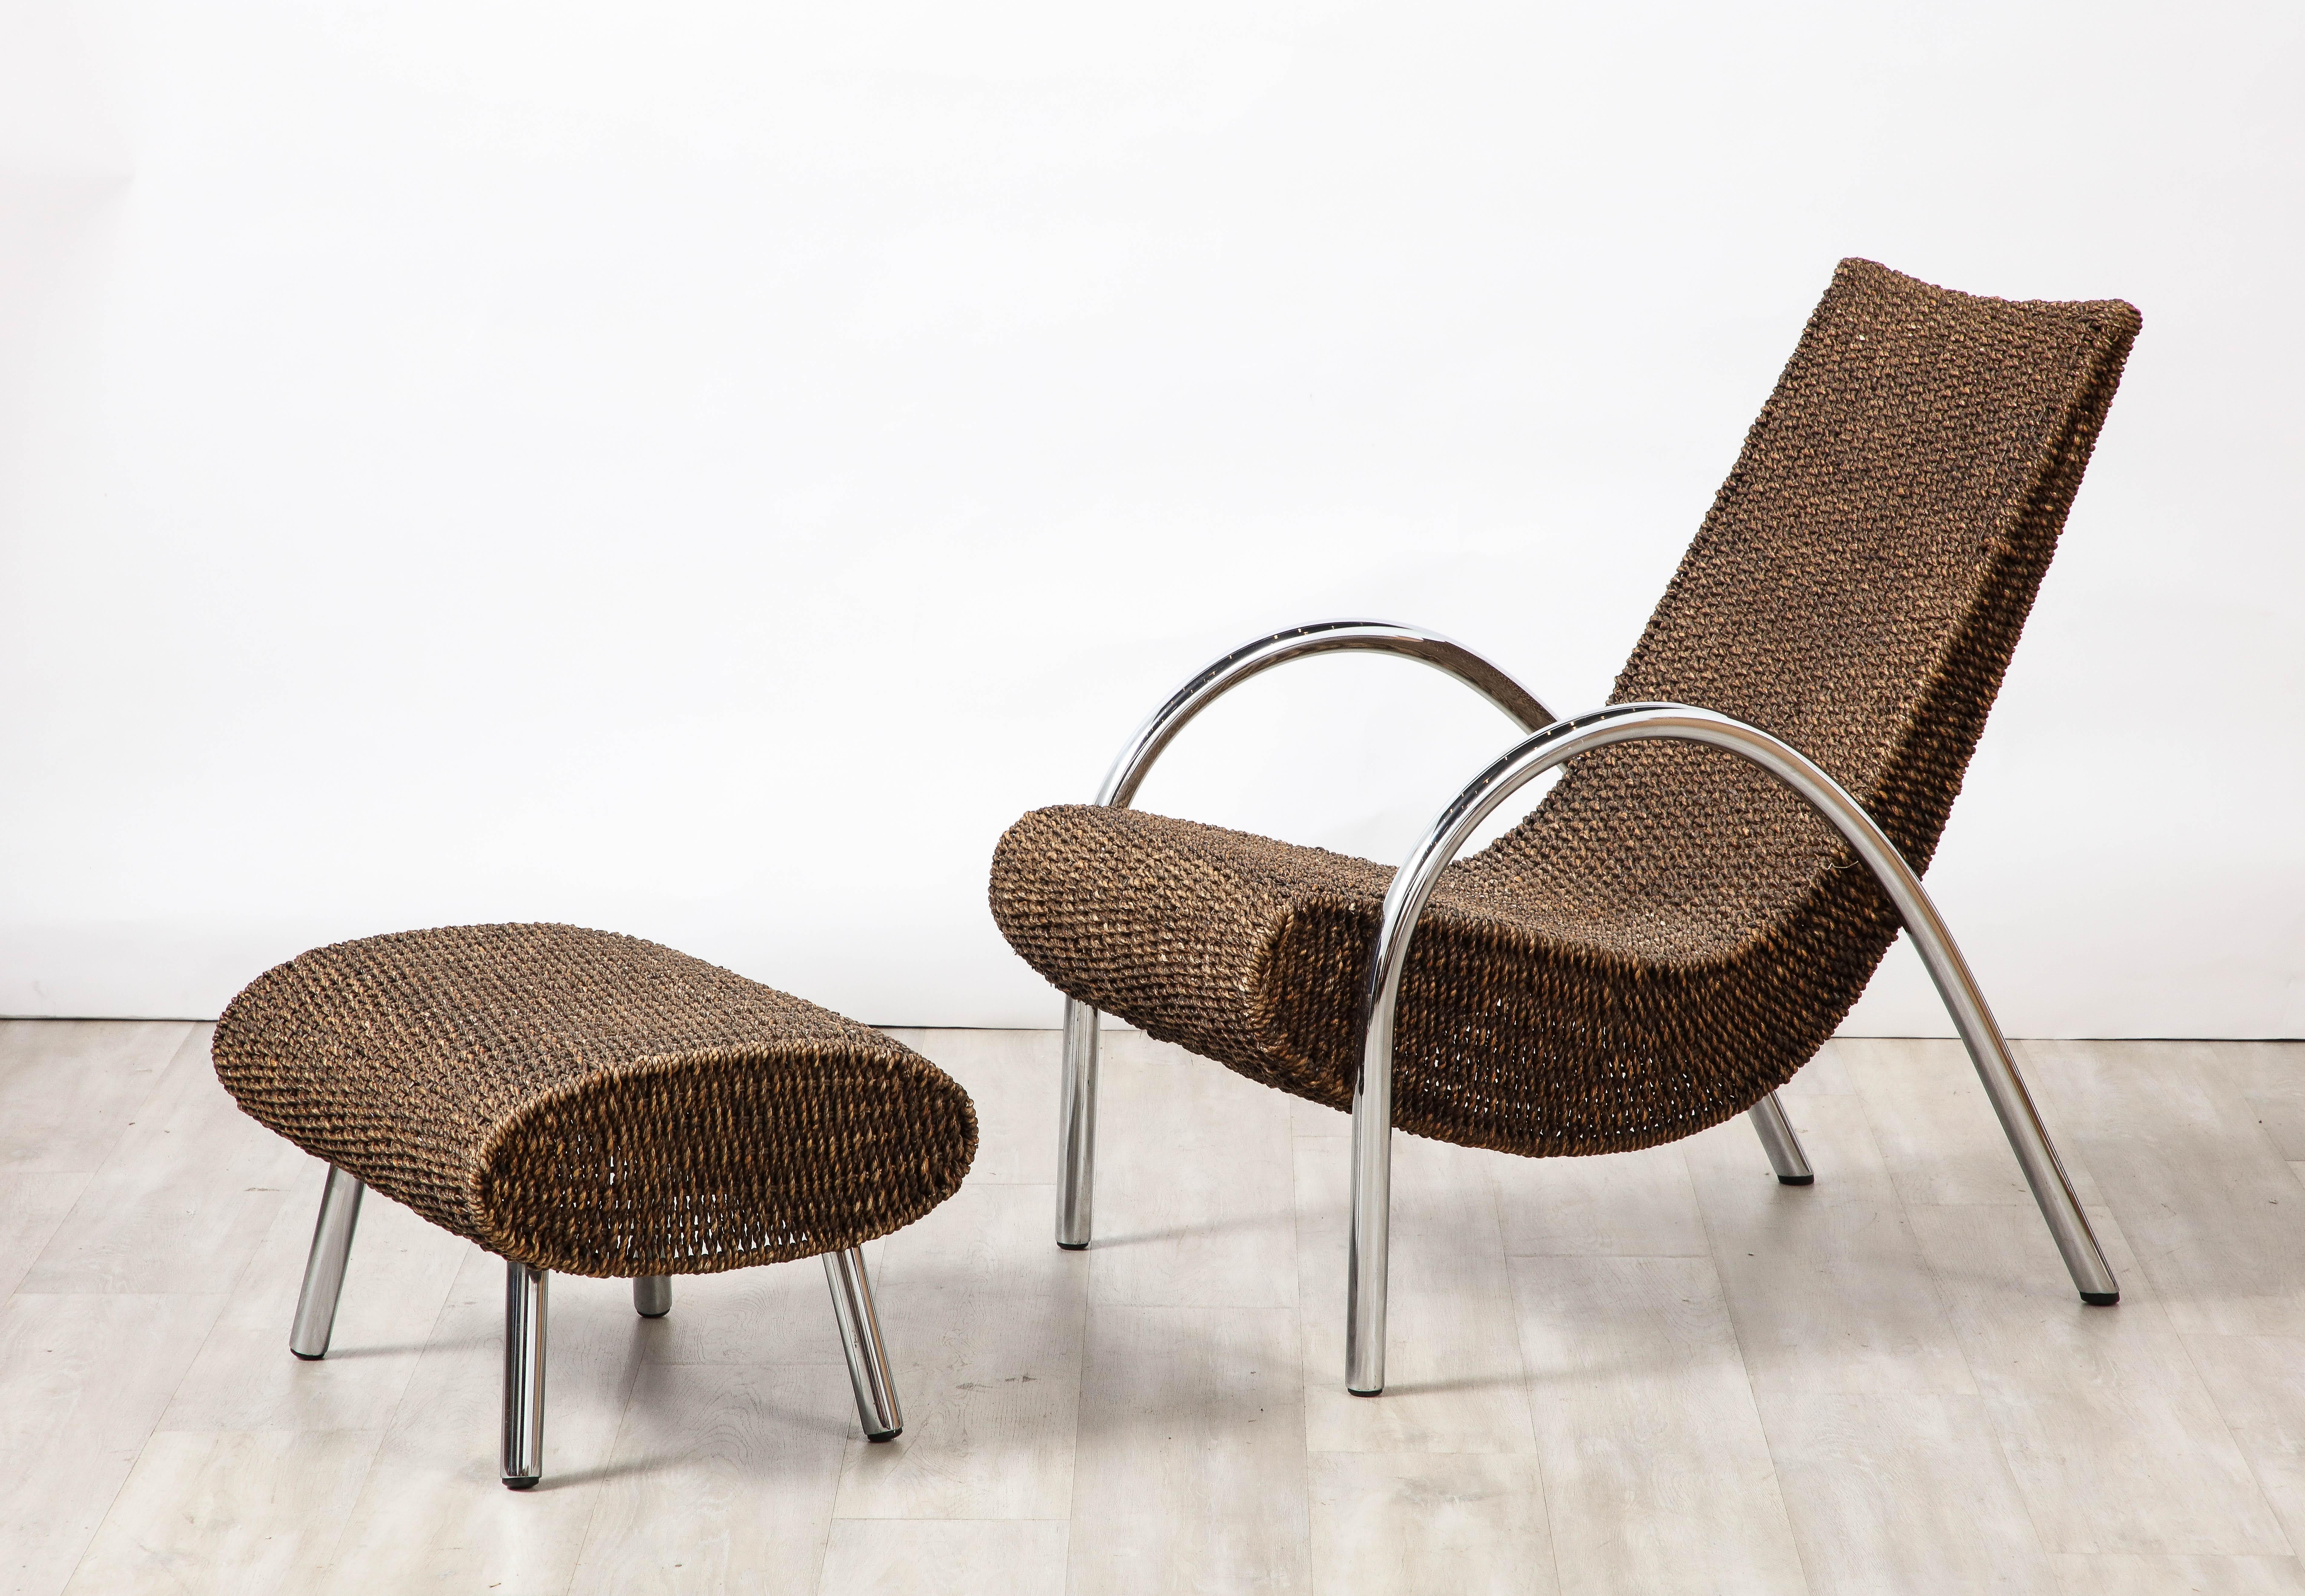 Spanish 1960's bamboo molded lounge chair with chrome sloped arm supports, with a matching ottoman.  Highly unique, sculptural and organic.  A wonderful contrast of the natural materials and metal.
Spain, circa 1960 
Size: 35